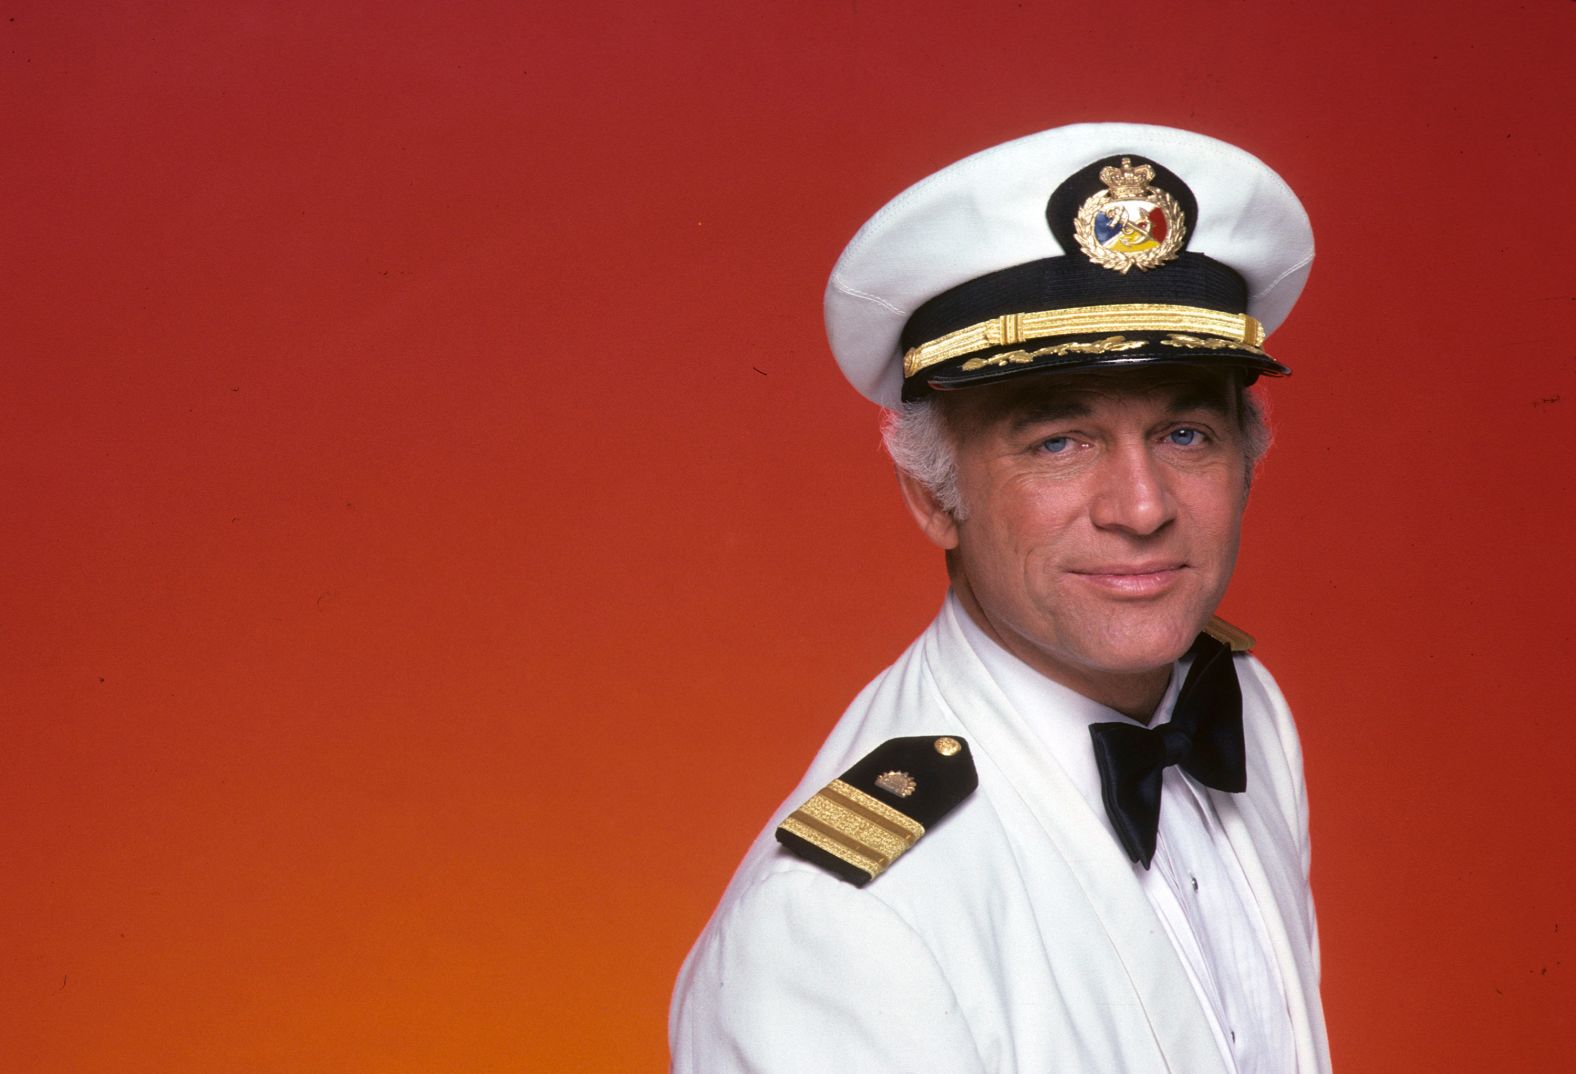 <a href="https://www.cnn.com/2021/05/29/entertainment/gavin-macleod-obituary/index.html" target="_blank">Gavin MacLeod,</a> known for his roles on "The Mary Tyler Moore Show" and "The Love Boat," died on May 29, his nephew Mark See told Variety. He was 90.